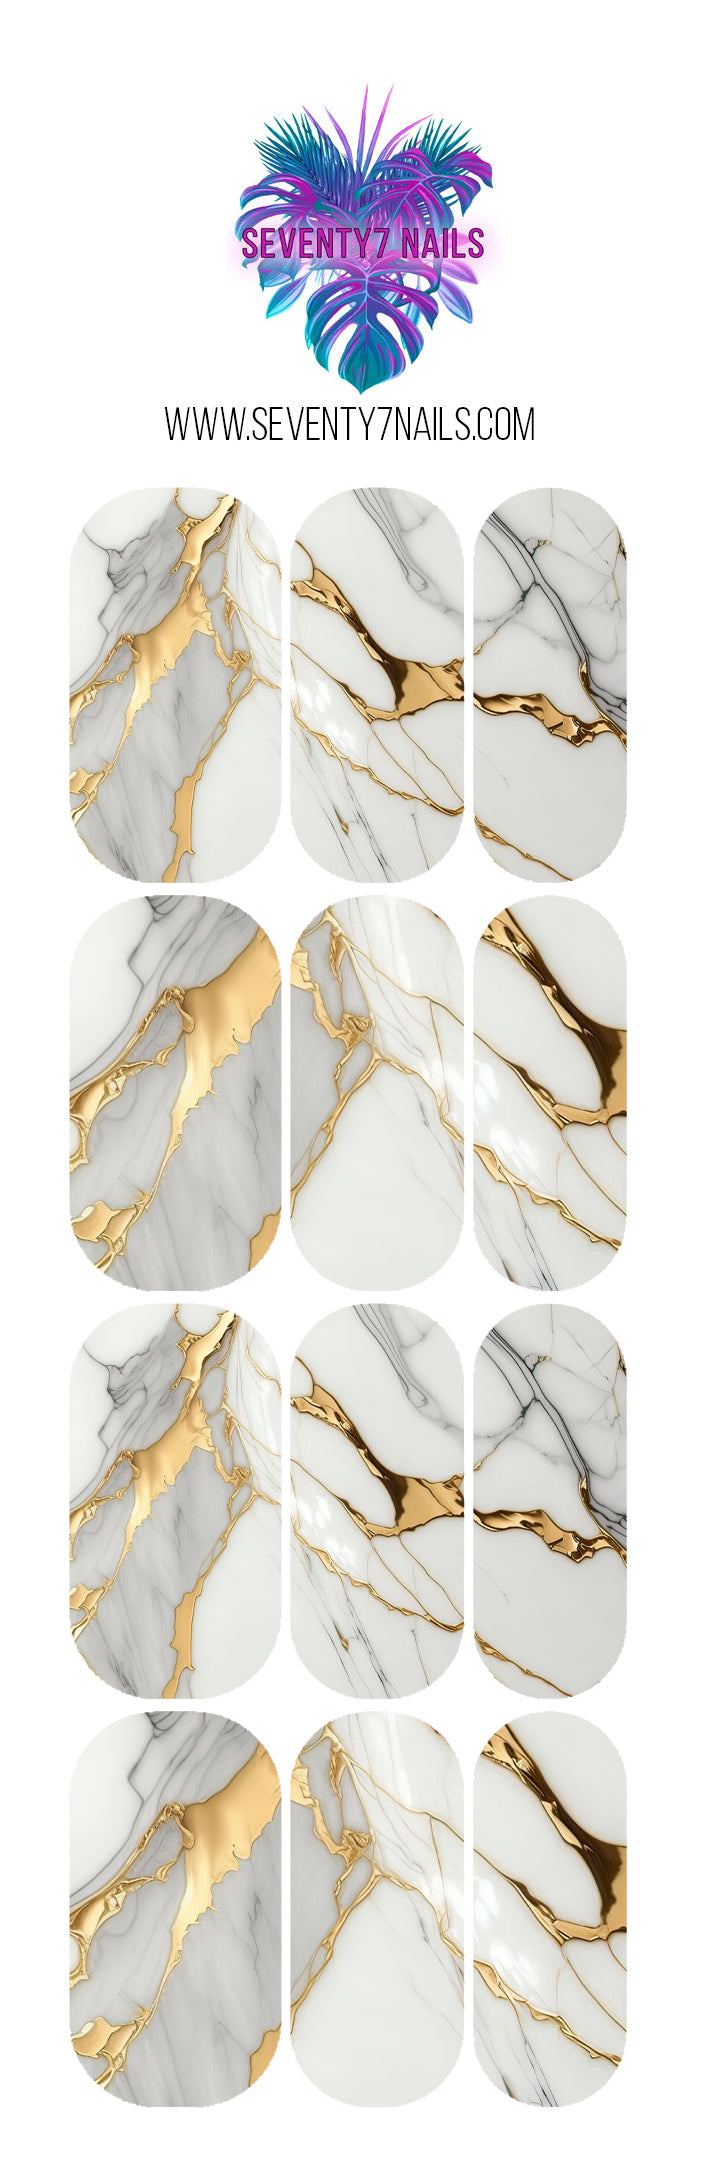 Waterslide Nail Decals - White Marble